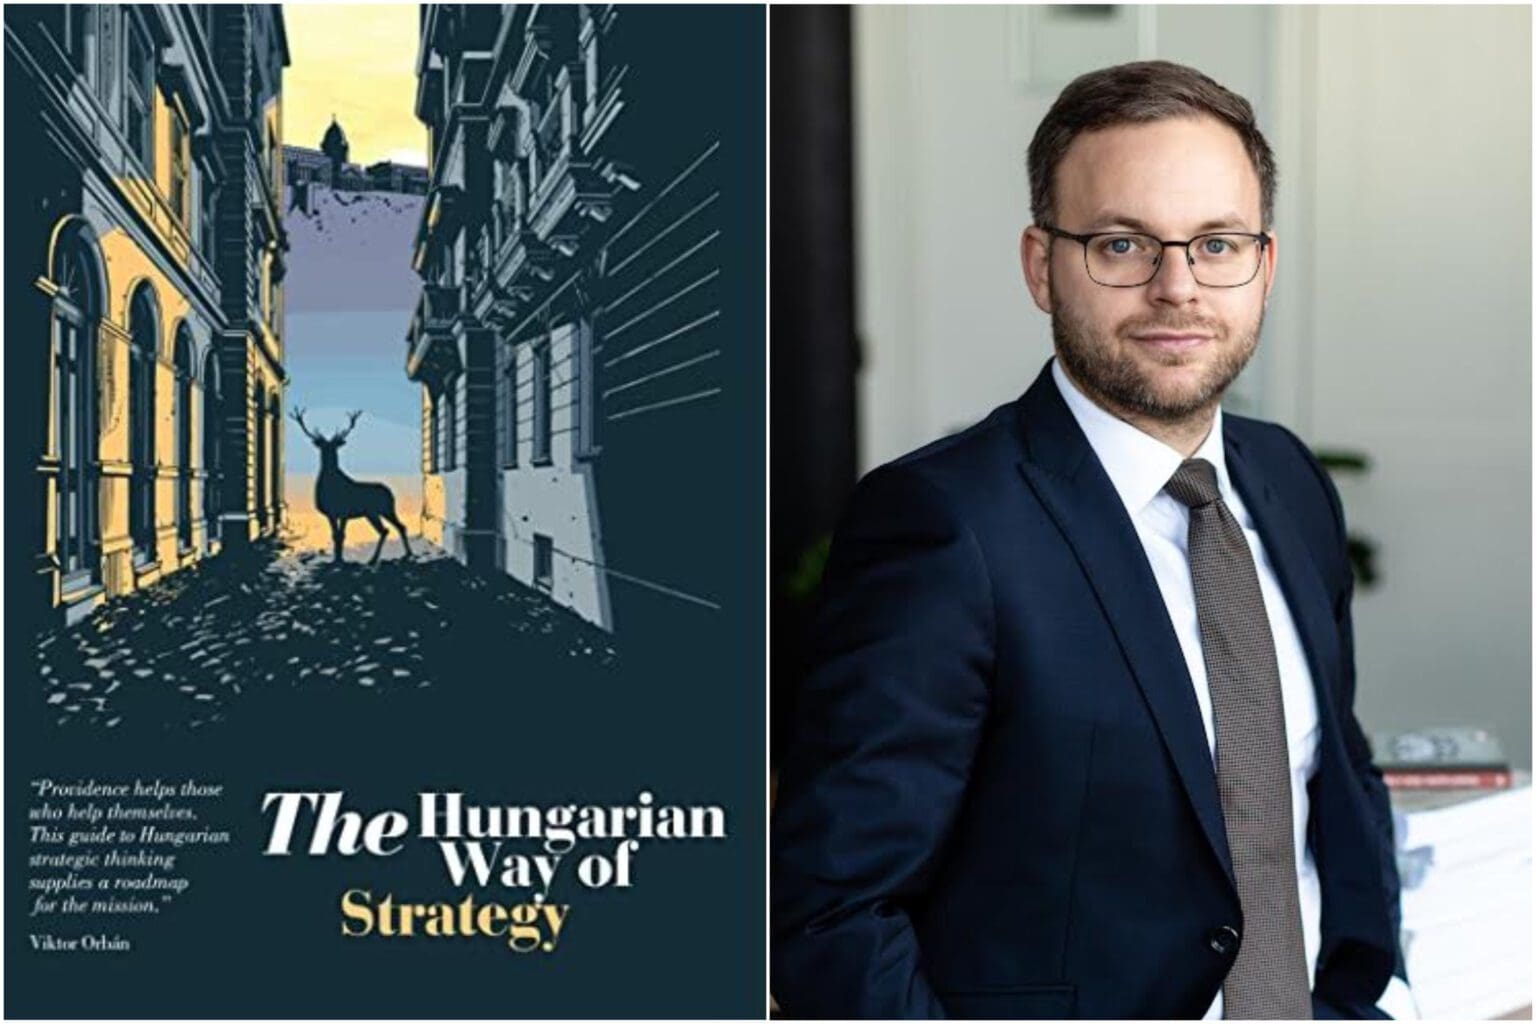 The Flight of the Bumblebee: A Review of ‘The Hungarian Way of Strategy’